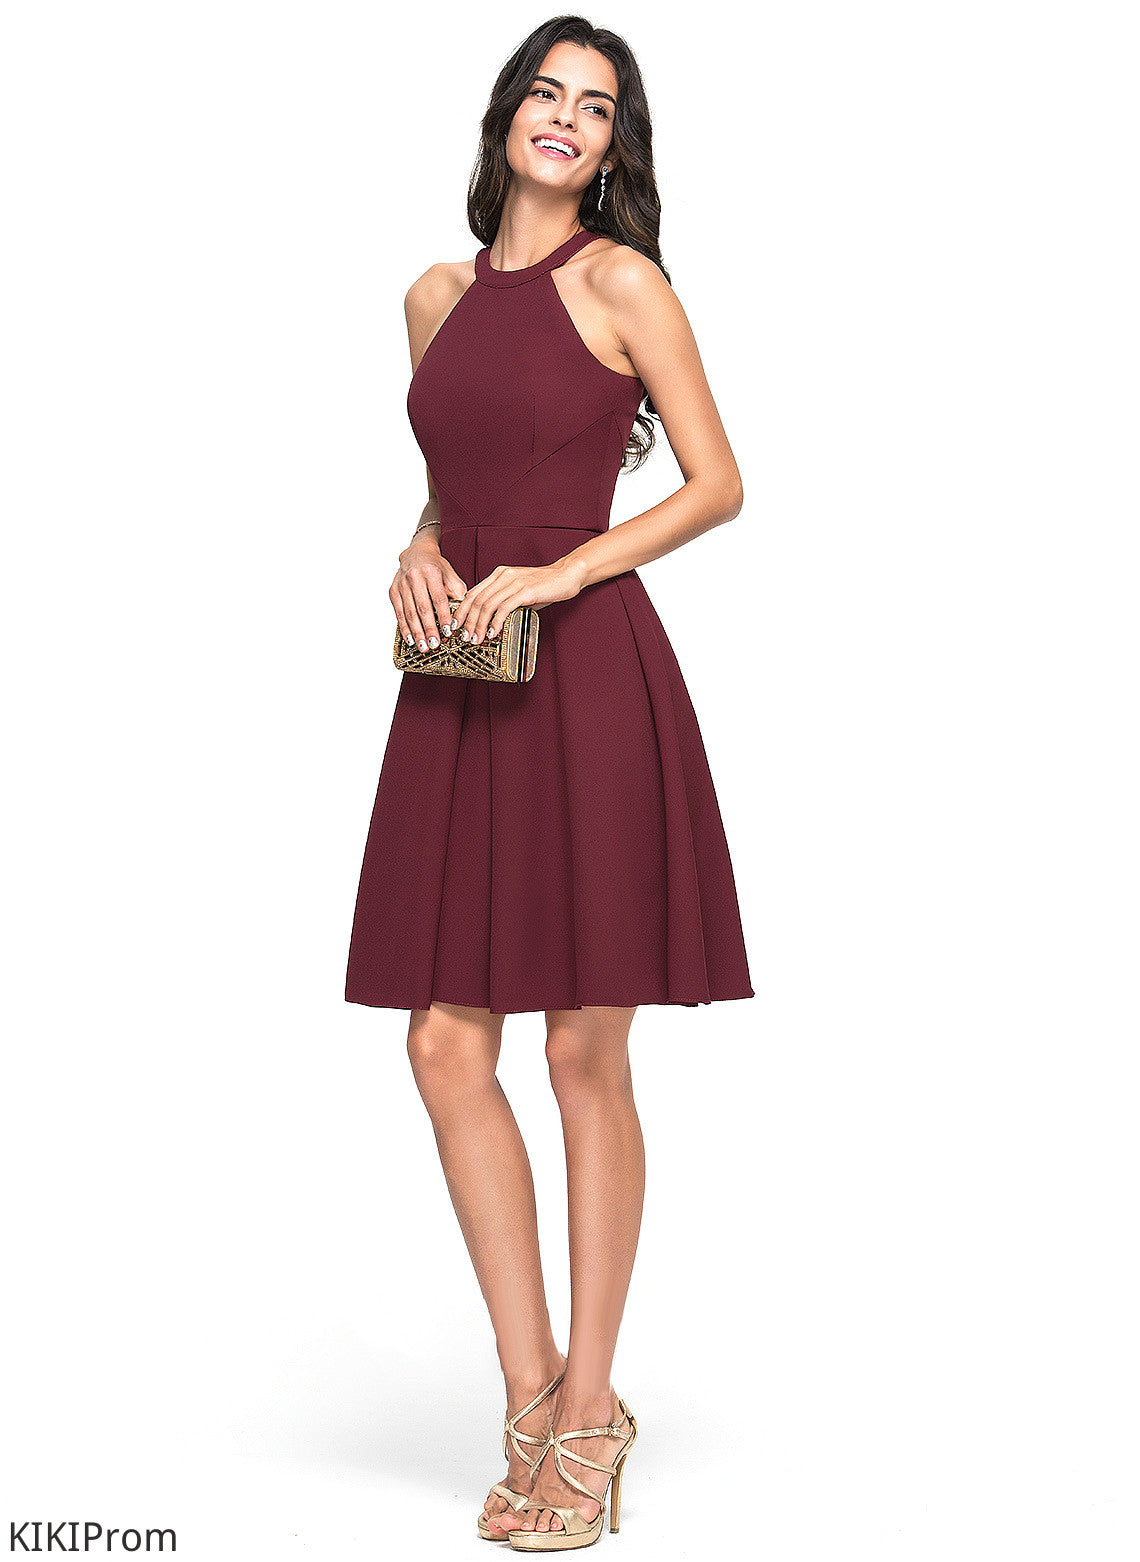 Satin Ruffle Homecoming Dresses With Erica Scoop Neck Homecoming Dress Knee-Length A-Line